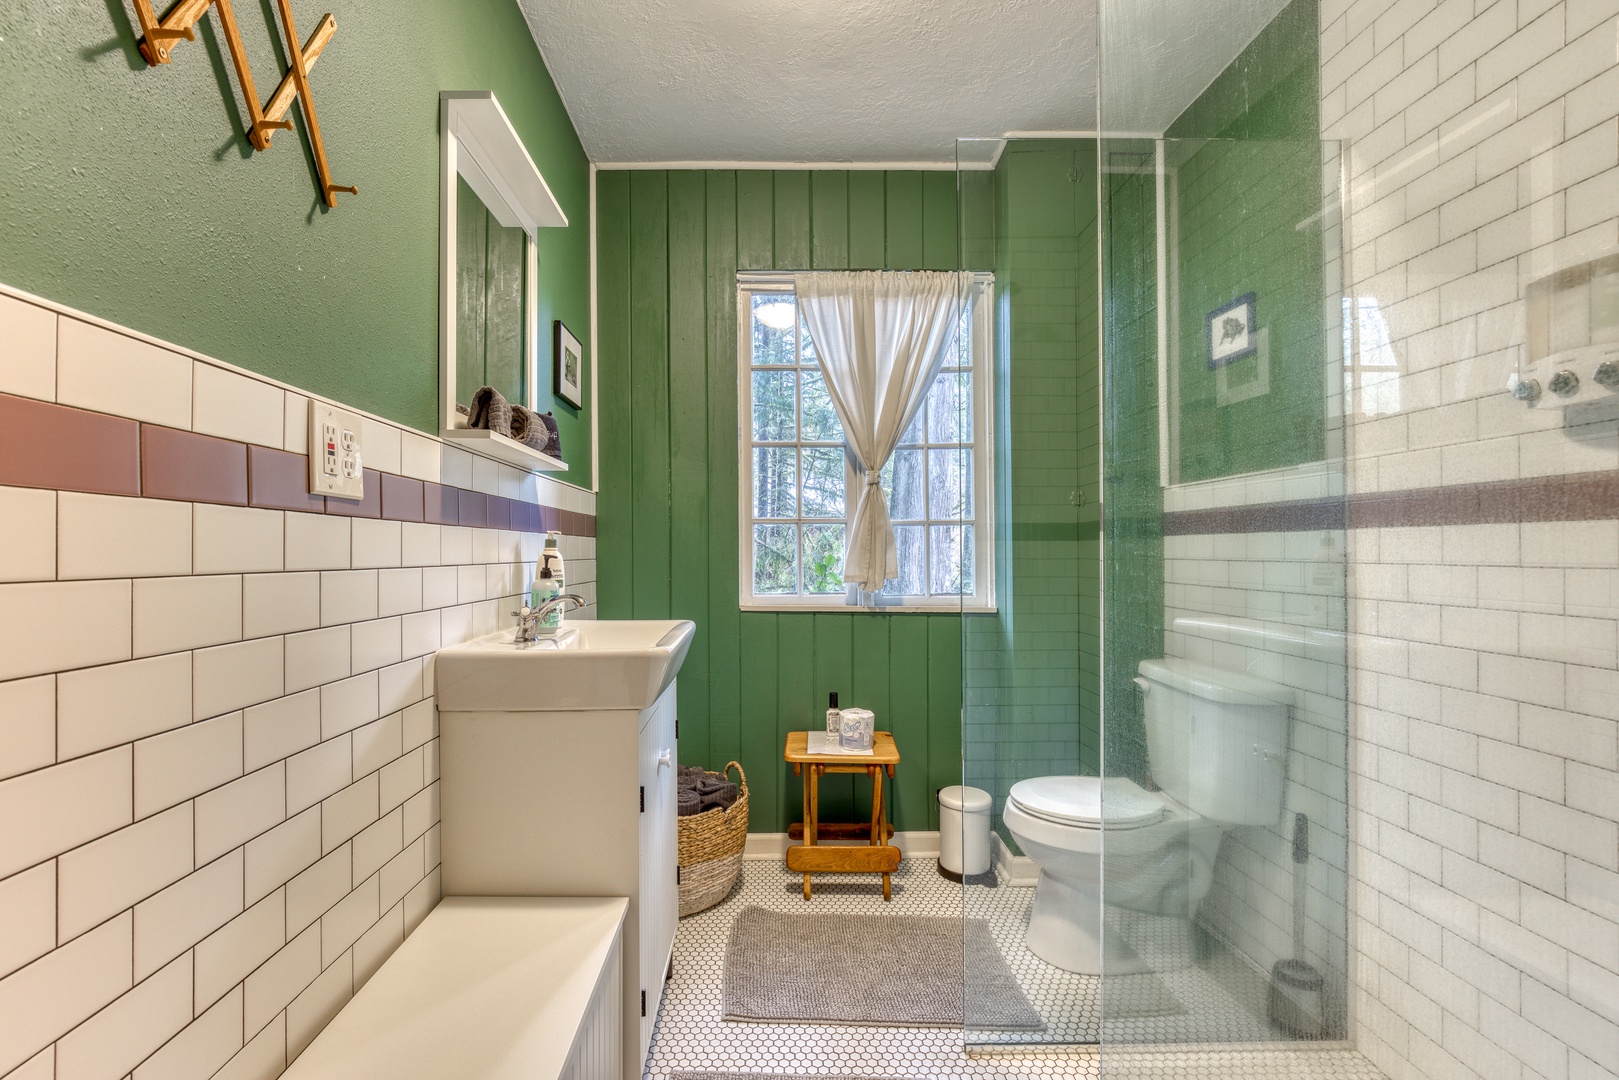 Brightwood Vacation Rentals, Springbrook Cabin - Newly remodeled bathroom with standup shower